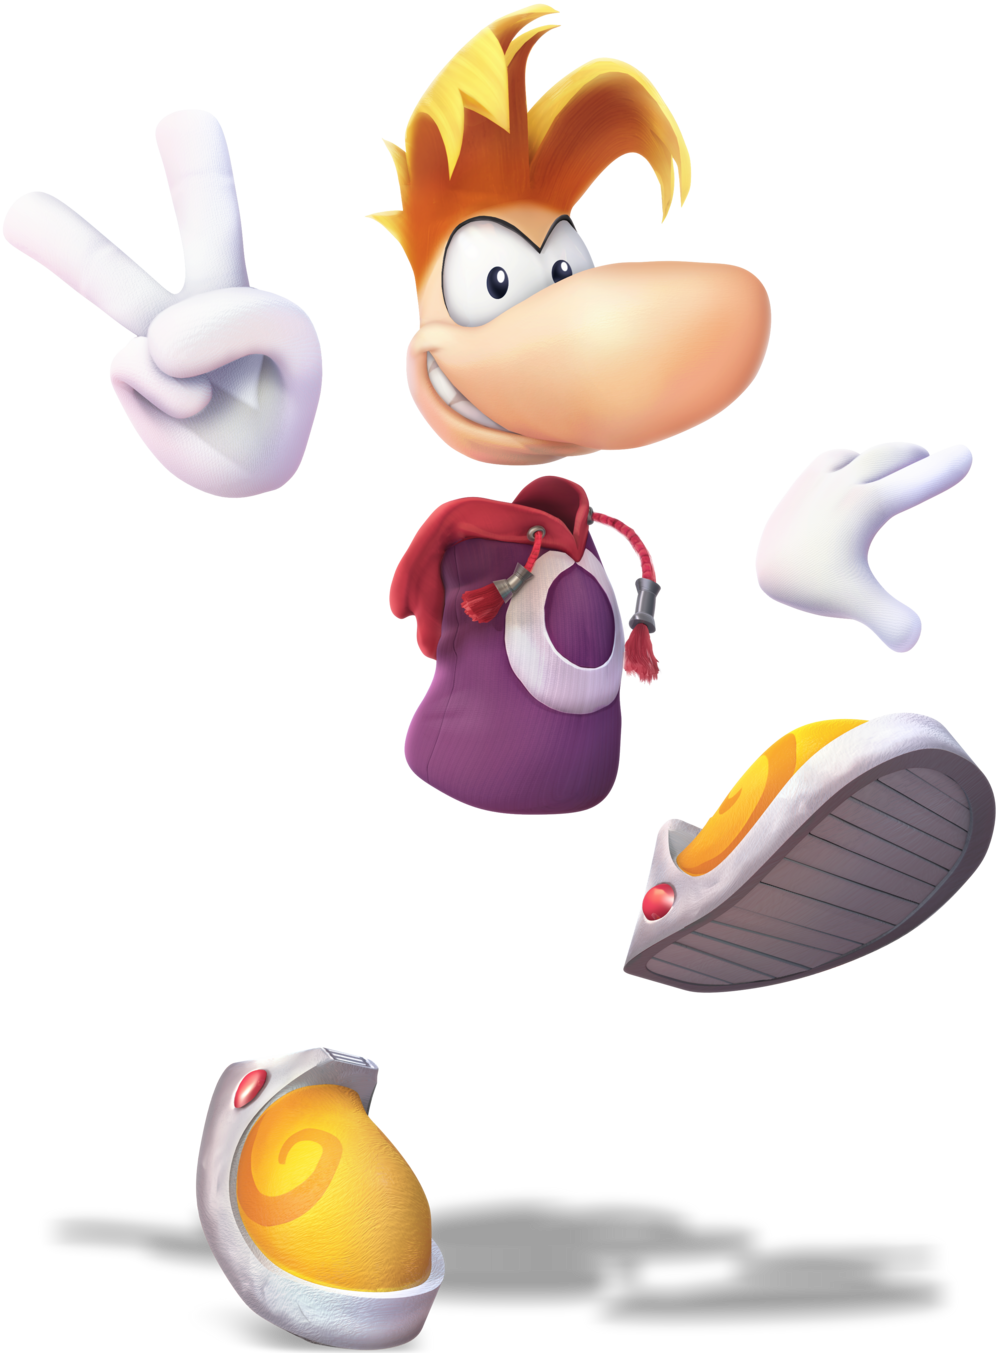 How Rayman Lost His Legs. Despite some excellent recent games